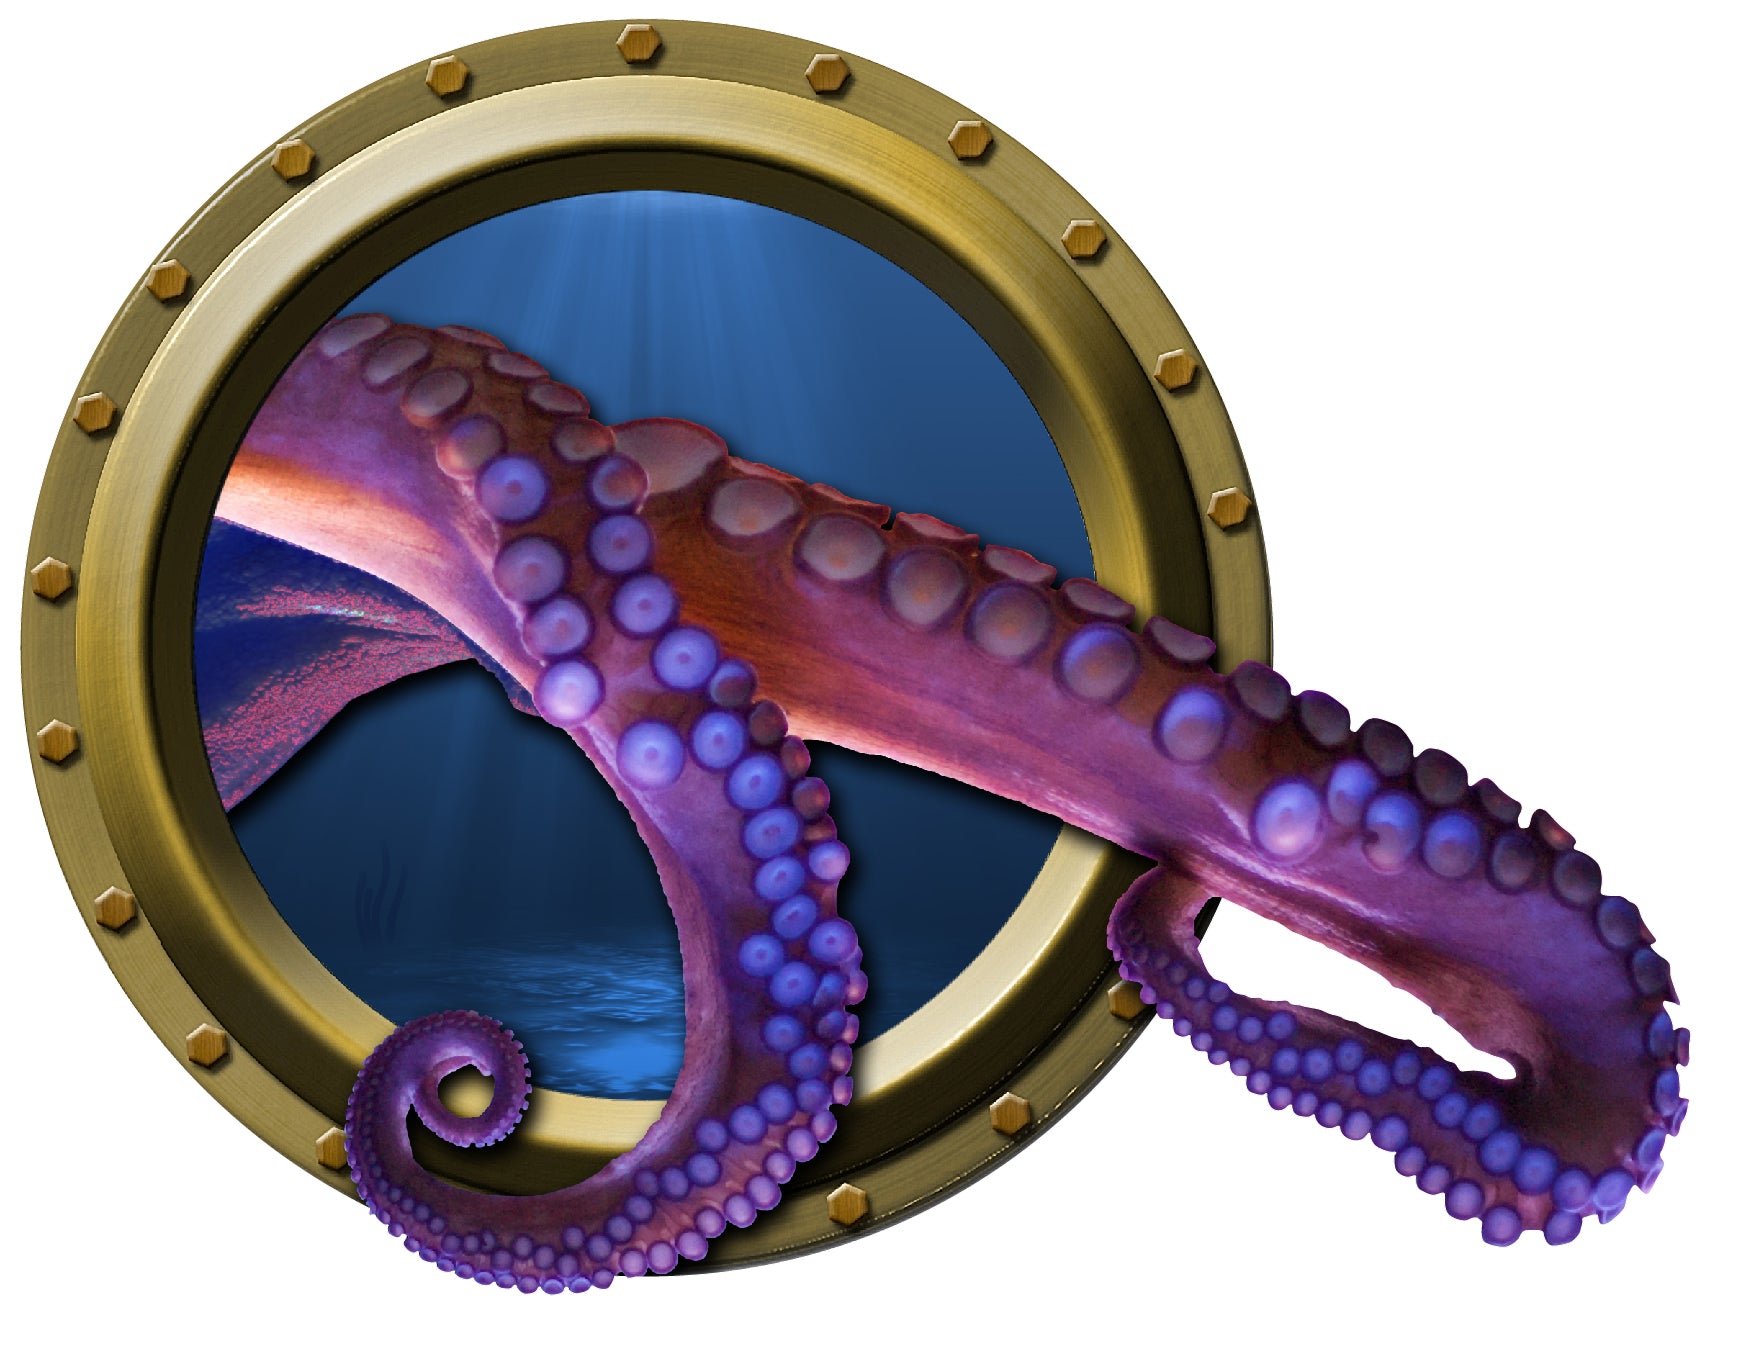 Break Through Octopus Tentacle Porthole Wall Decal